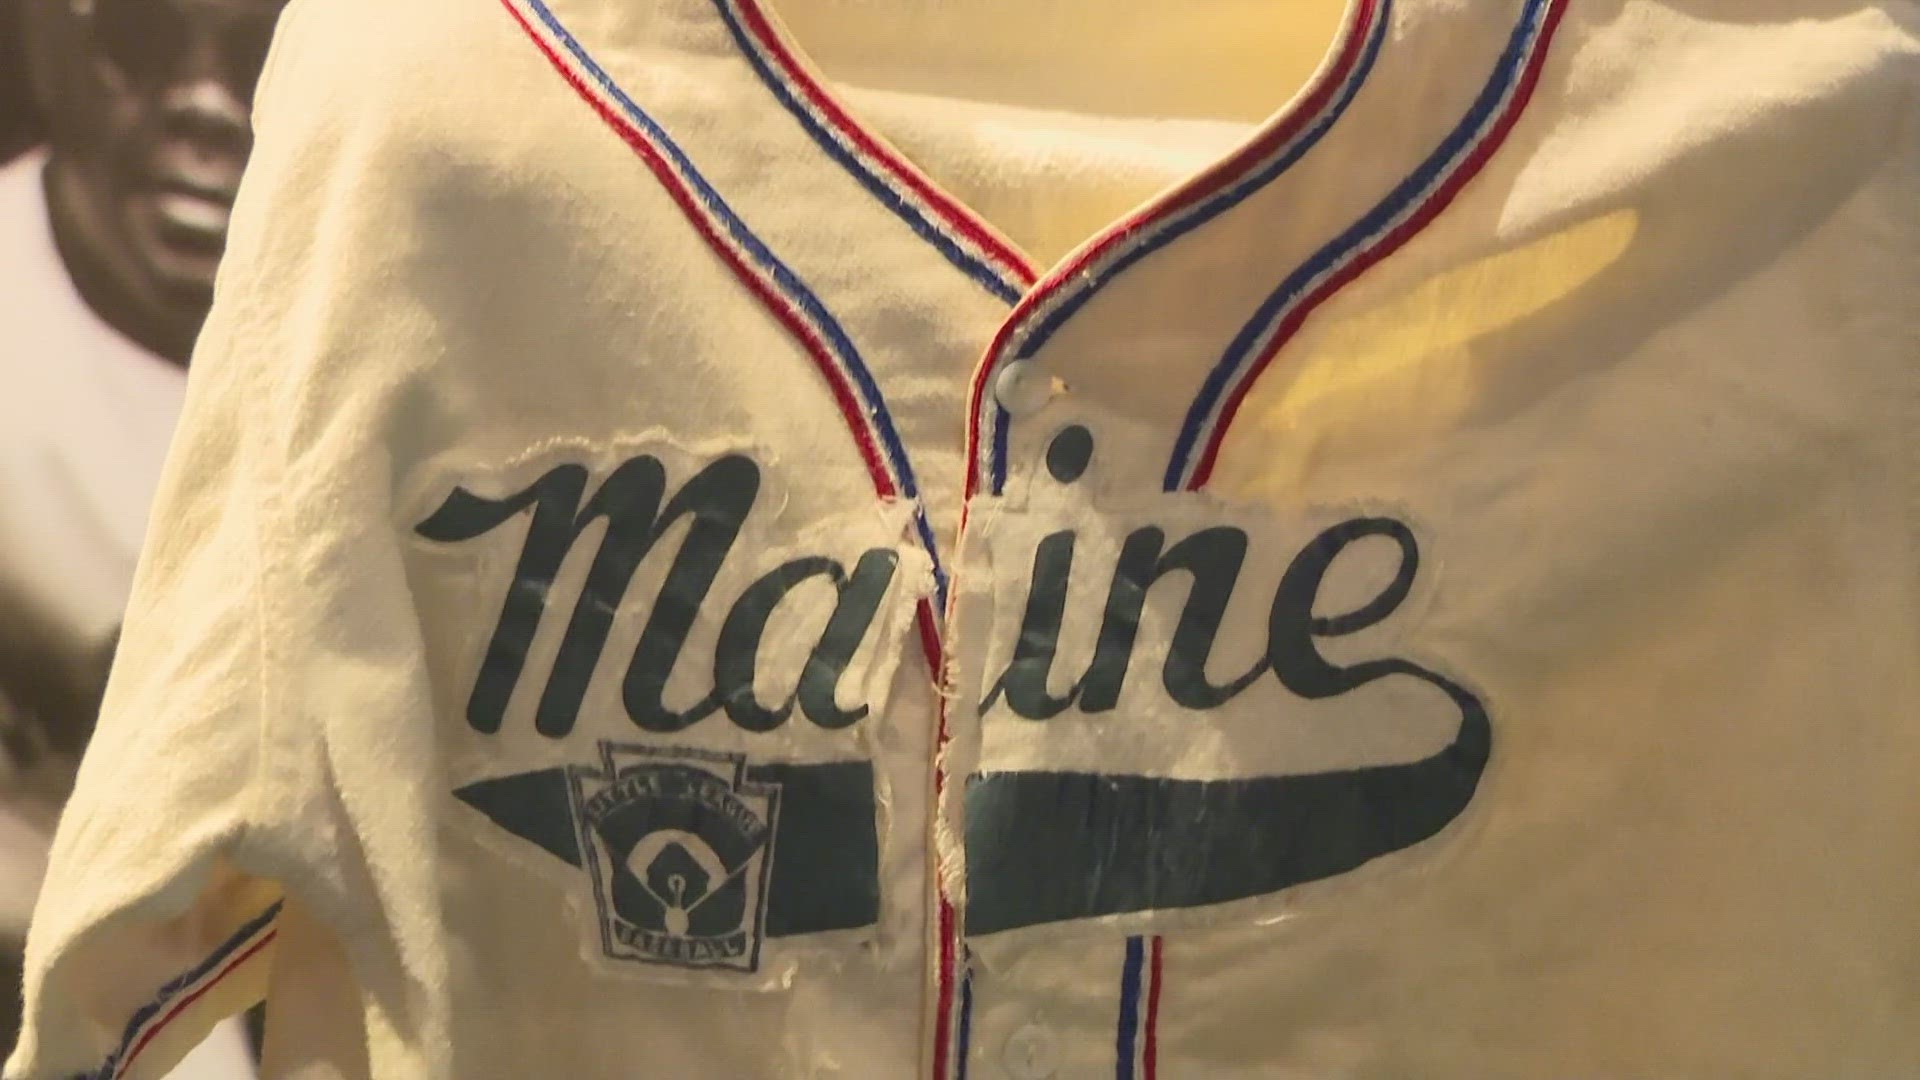 A jersey by one Maine player from the 1951 World Series is one of the oldest fixtures in the World of Little League Museum in Williamsport, Pennsylvania.